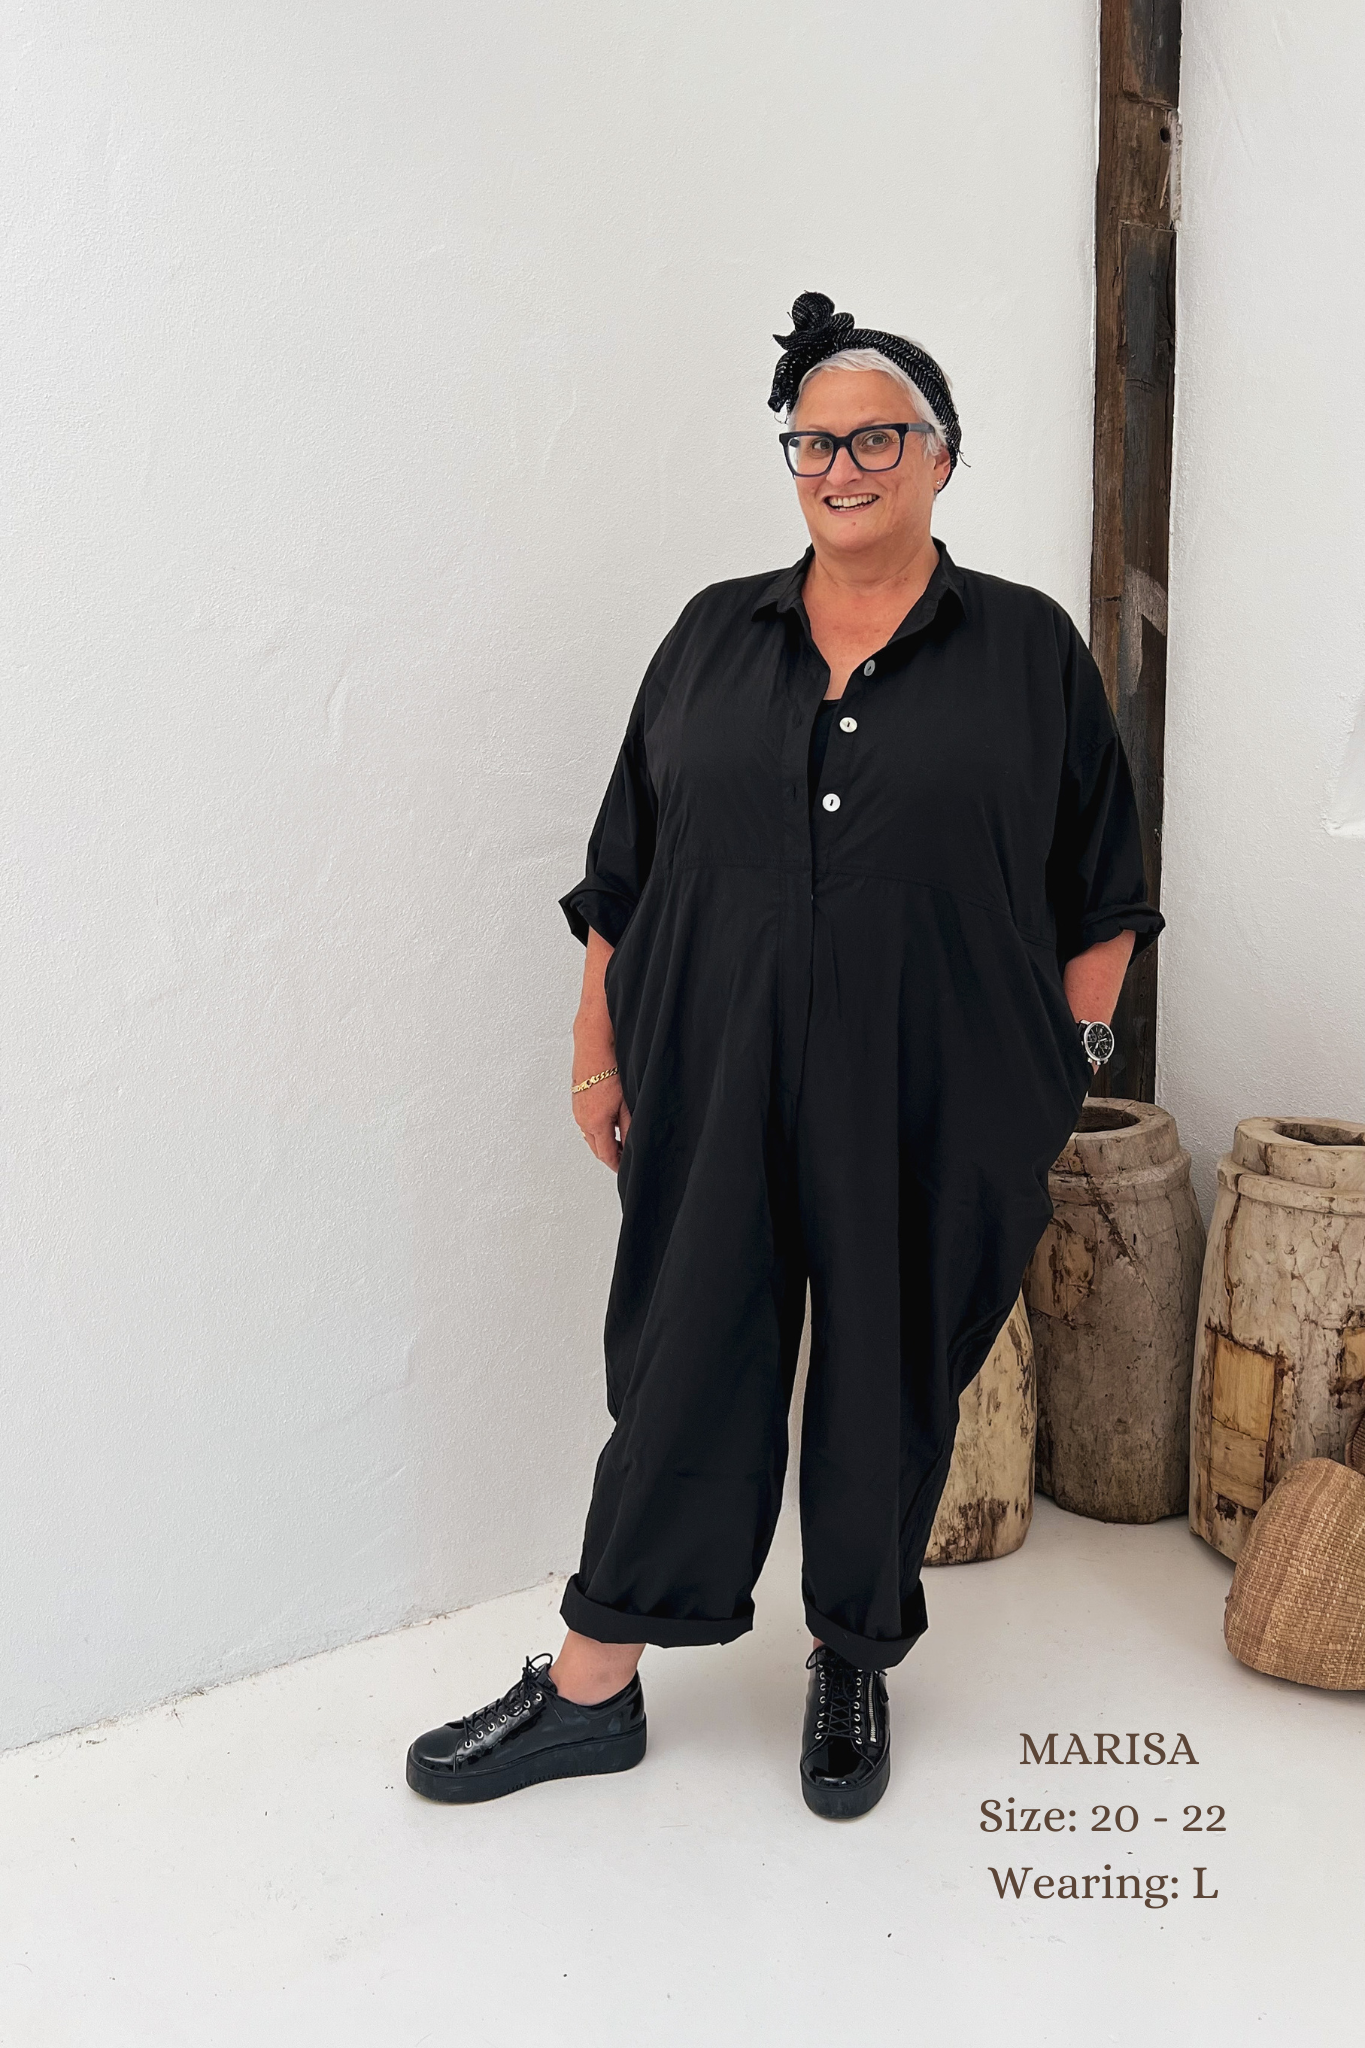 A MegbyDesign model is wearing a black boiler suit made from cotton twill with side and back pockets, double stitched and agoya shell buttons.